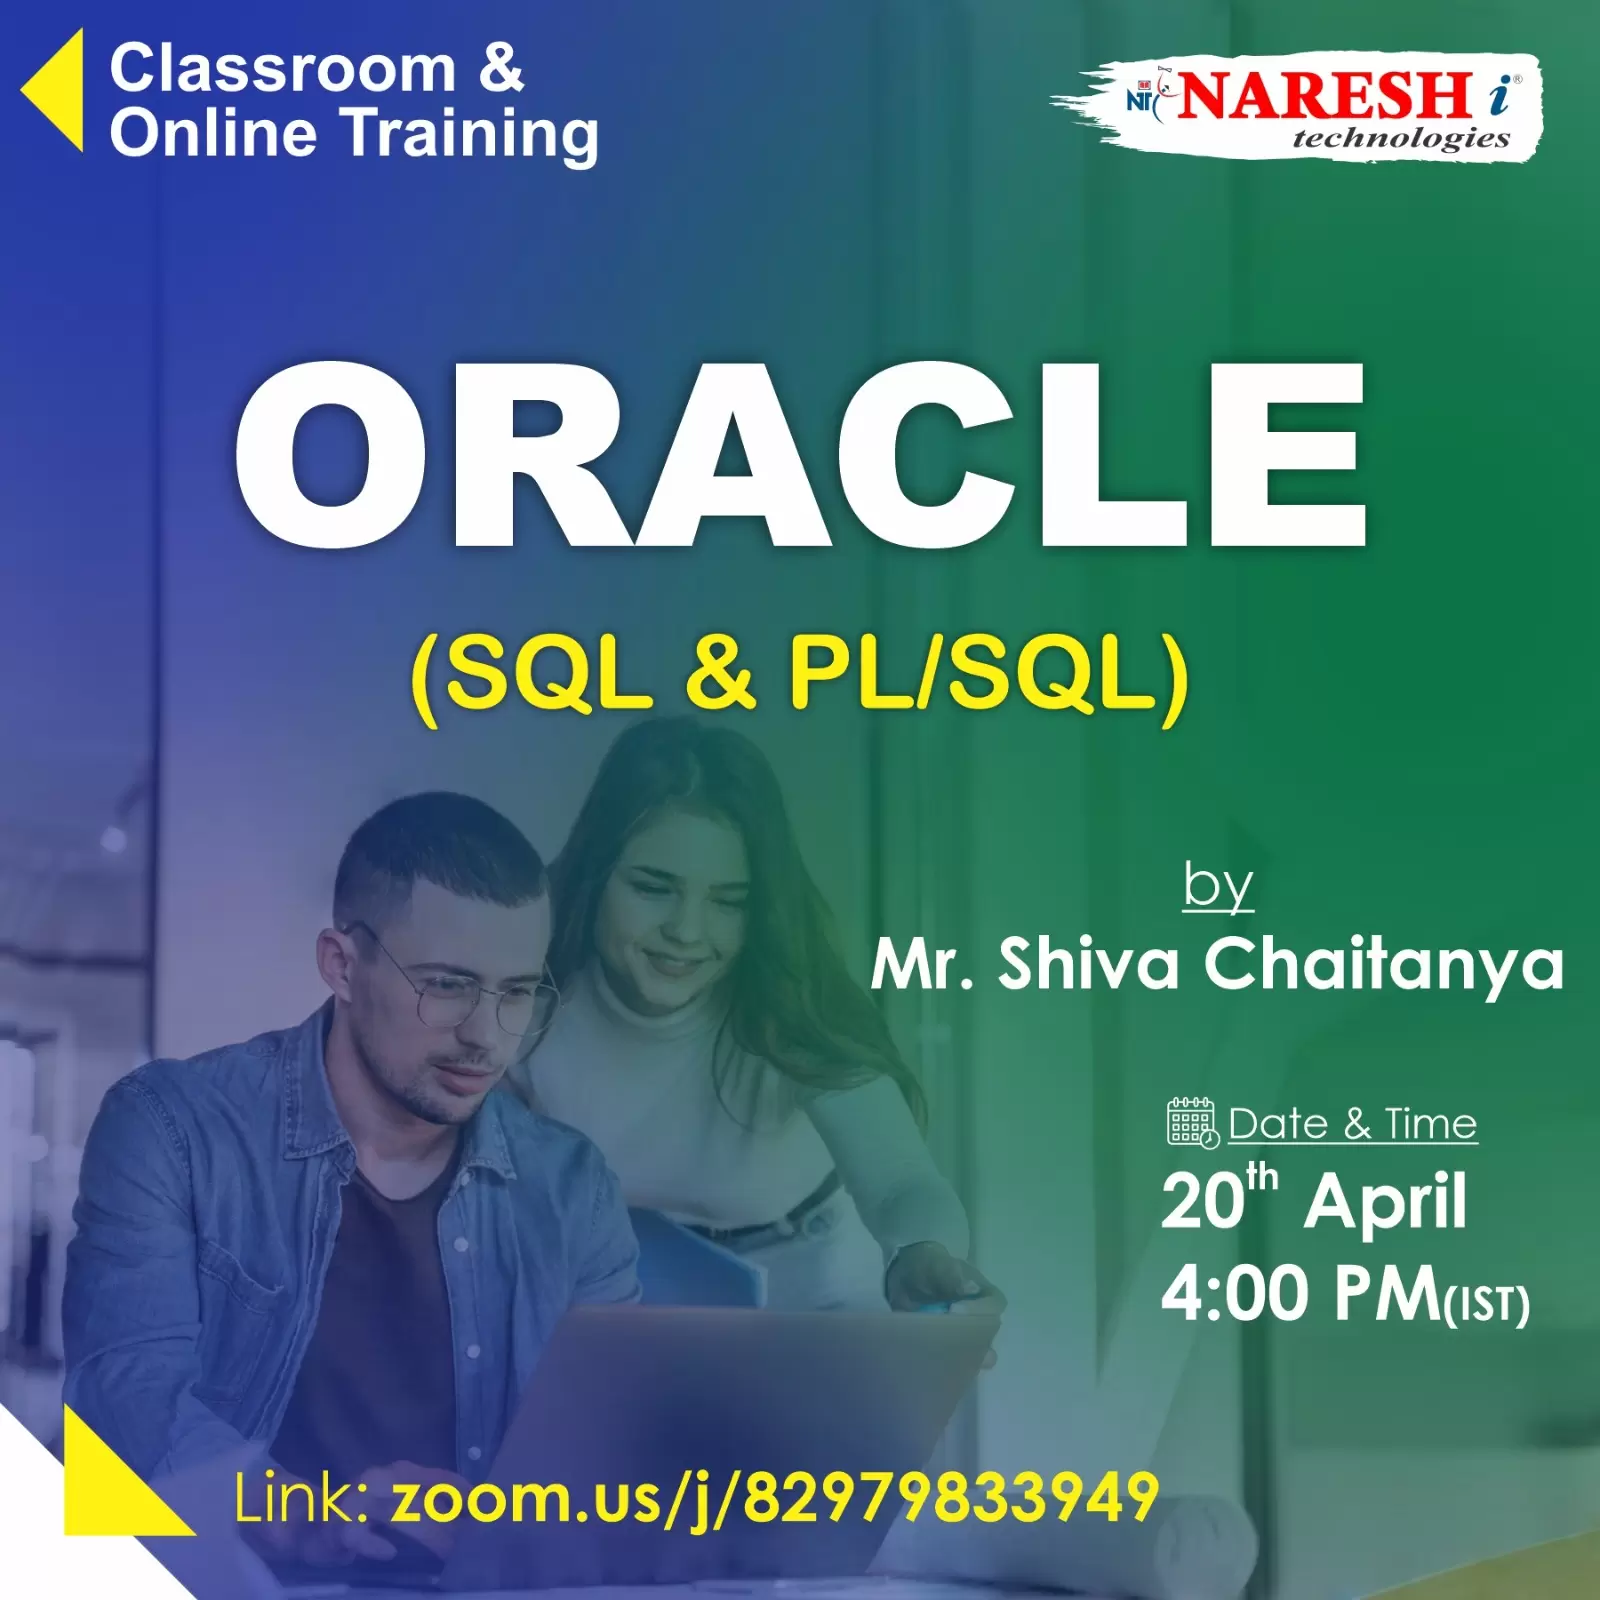 Attend Free Online Demo On Oracle by Mr. Shiva Chaithanya -Naresh